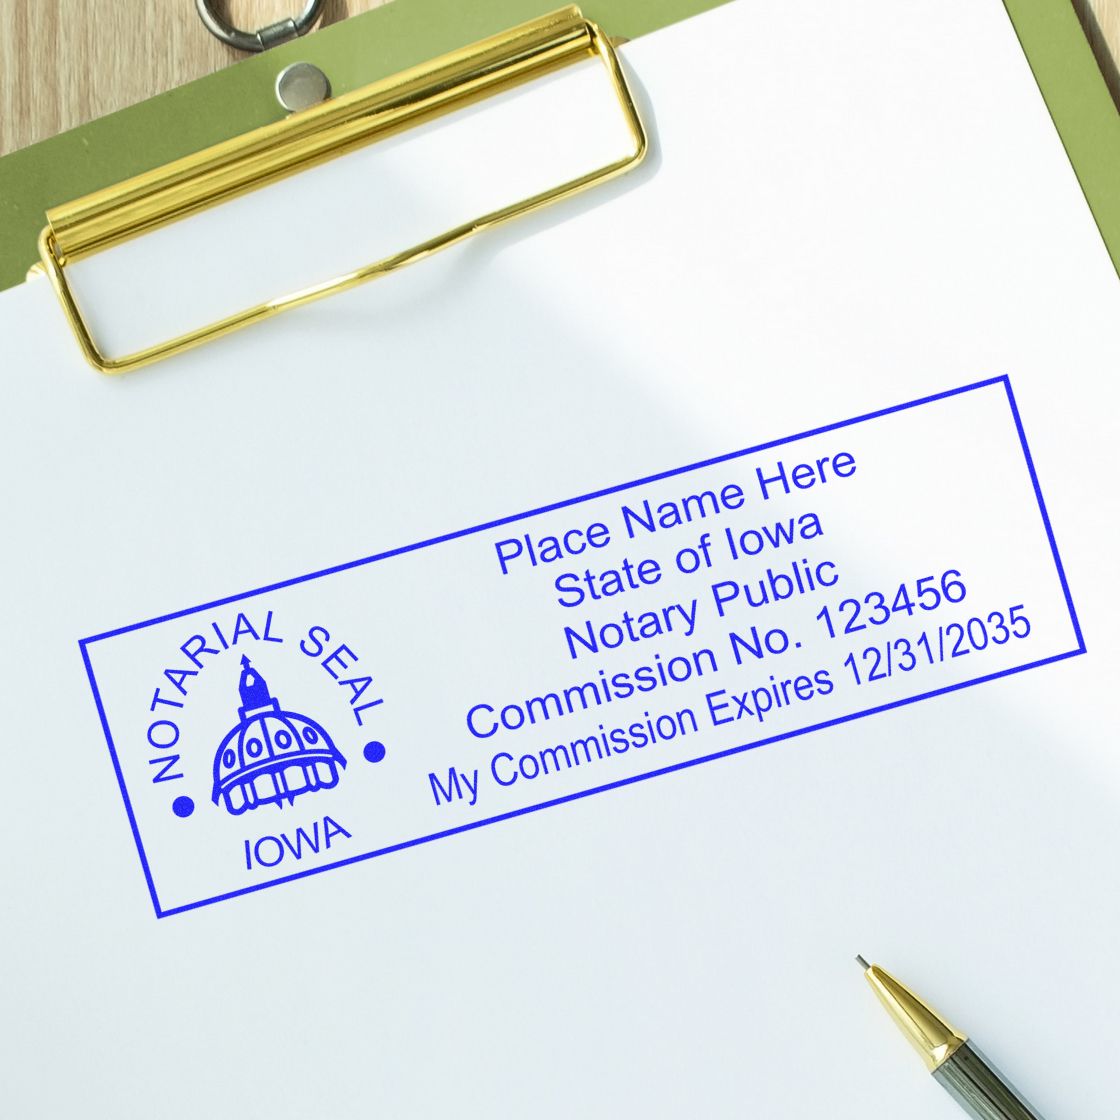 This paper is stamped with a sample imprint of the Wooden Handle Iowa State Seal Notary Public Stamp, signifying its quality and reliability.